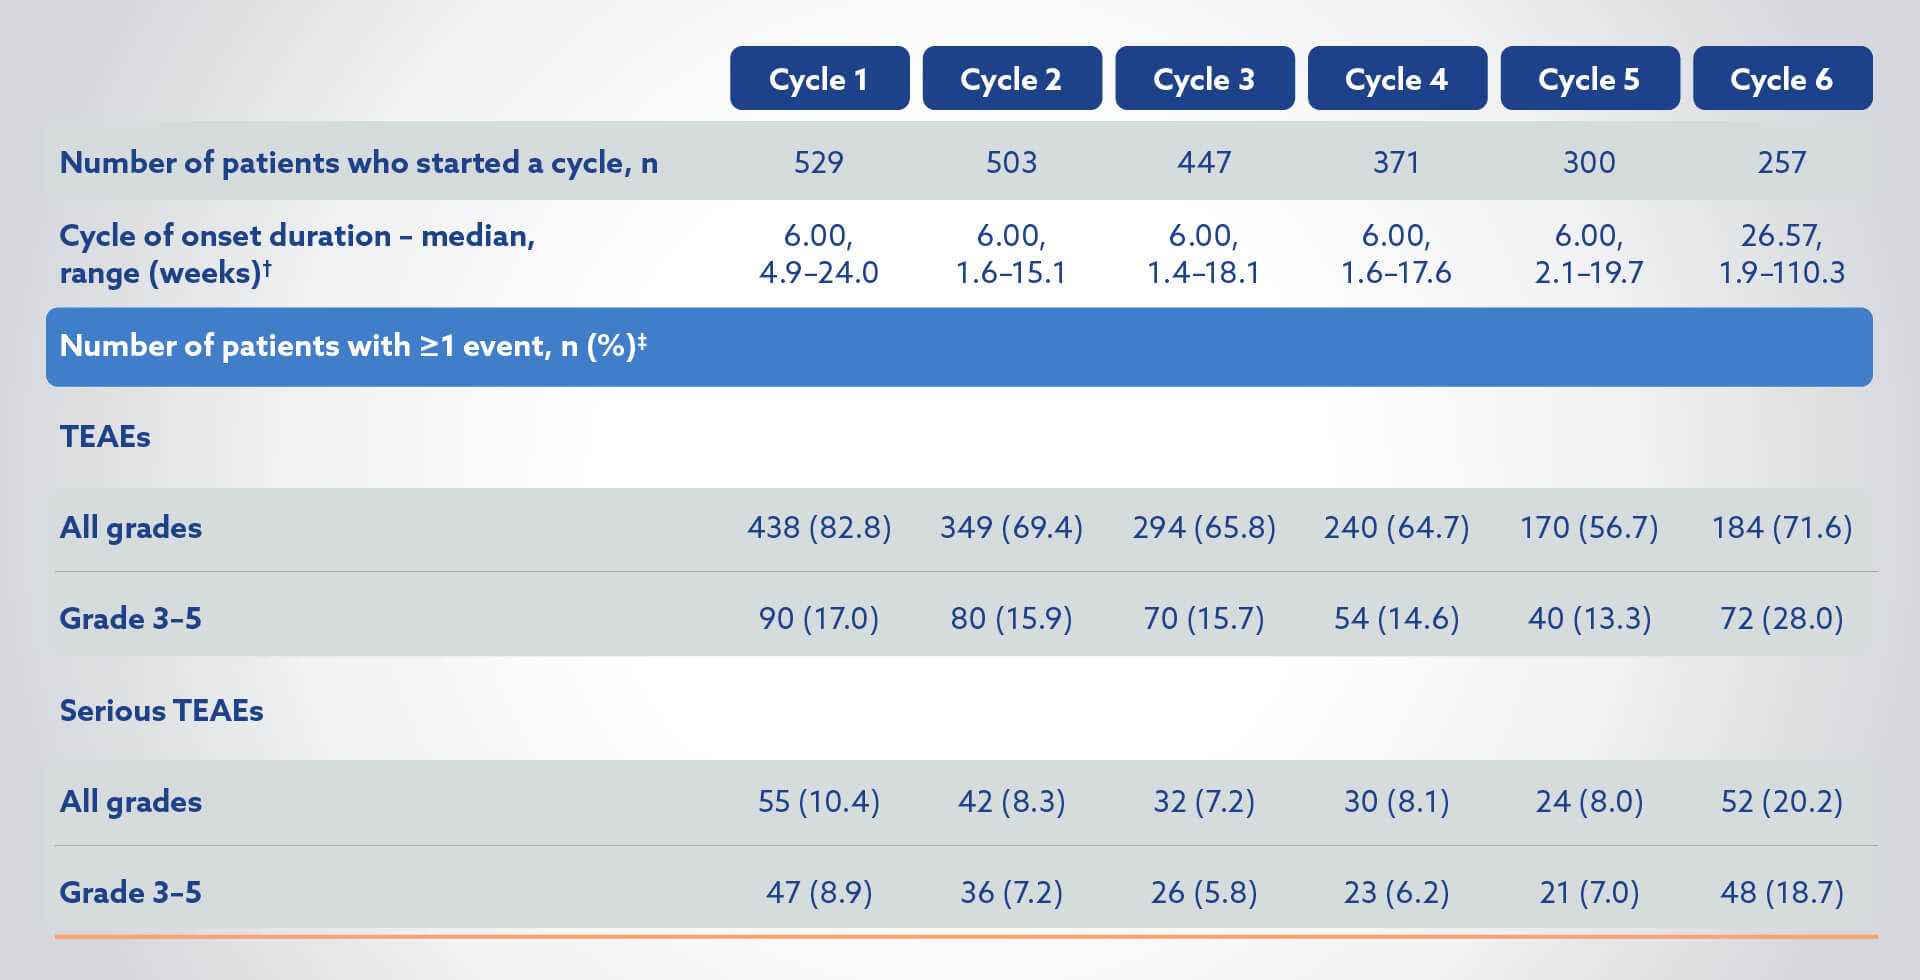 Table showing treatment-emergent adverse events (TEAEs) in the Pluvicto + BSoC group (N=529) by cycle of onset.